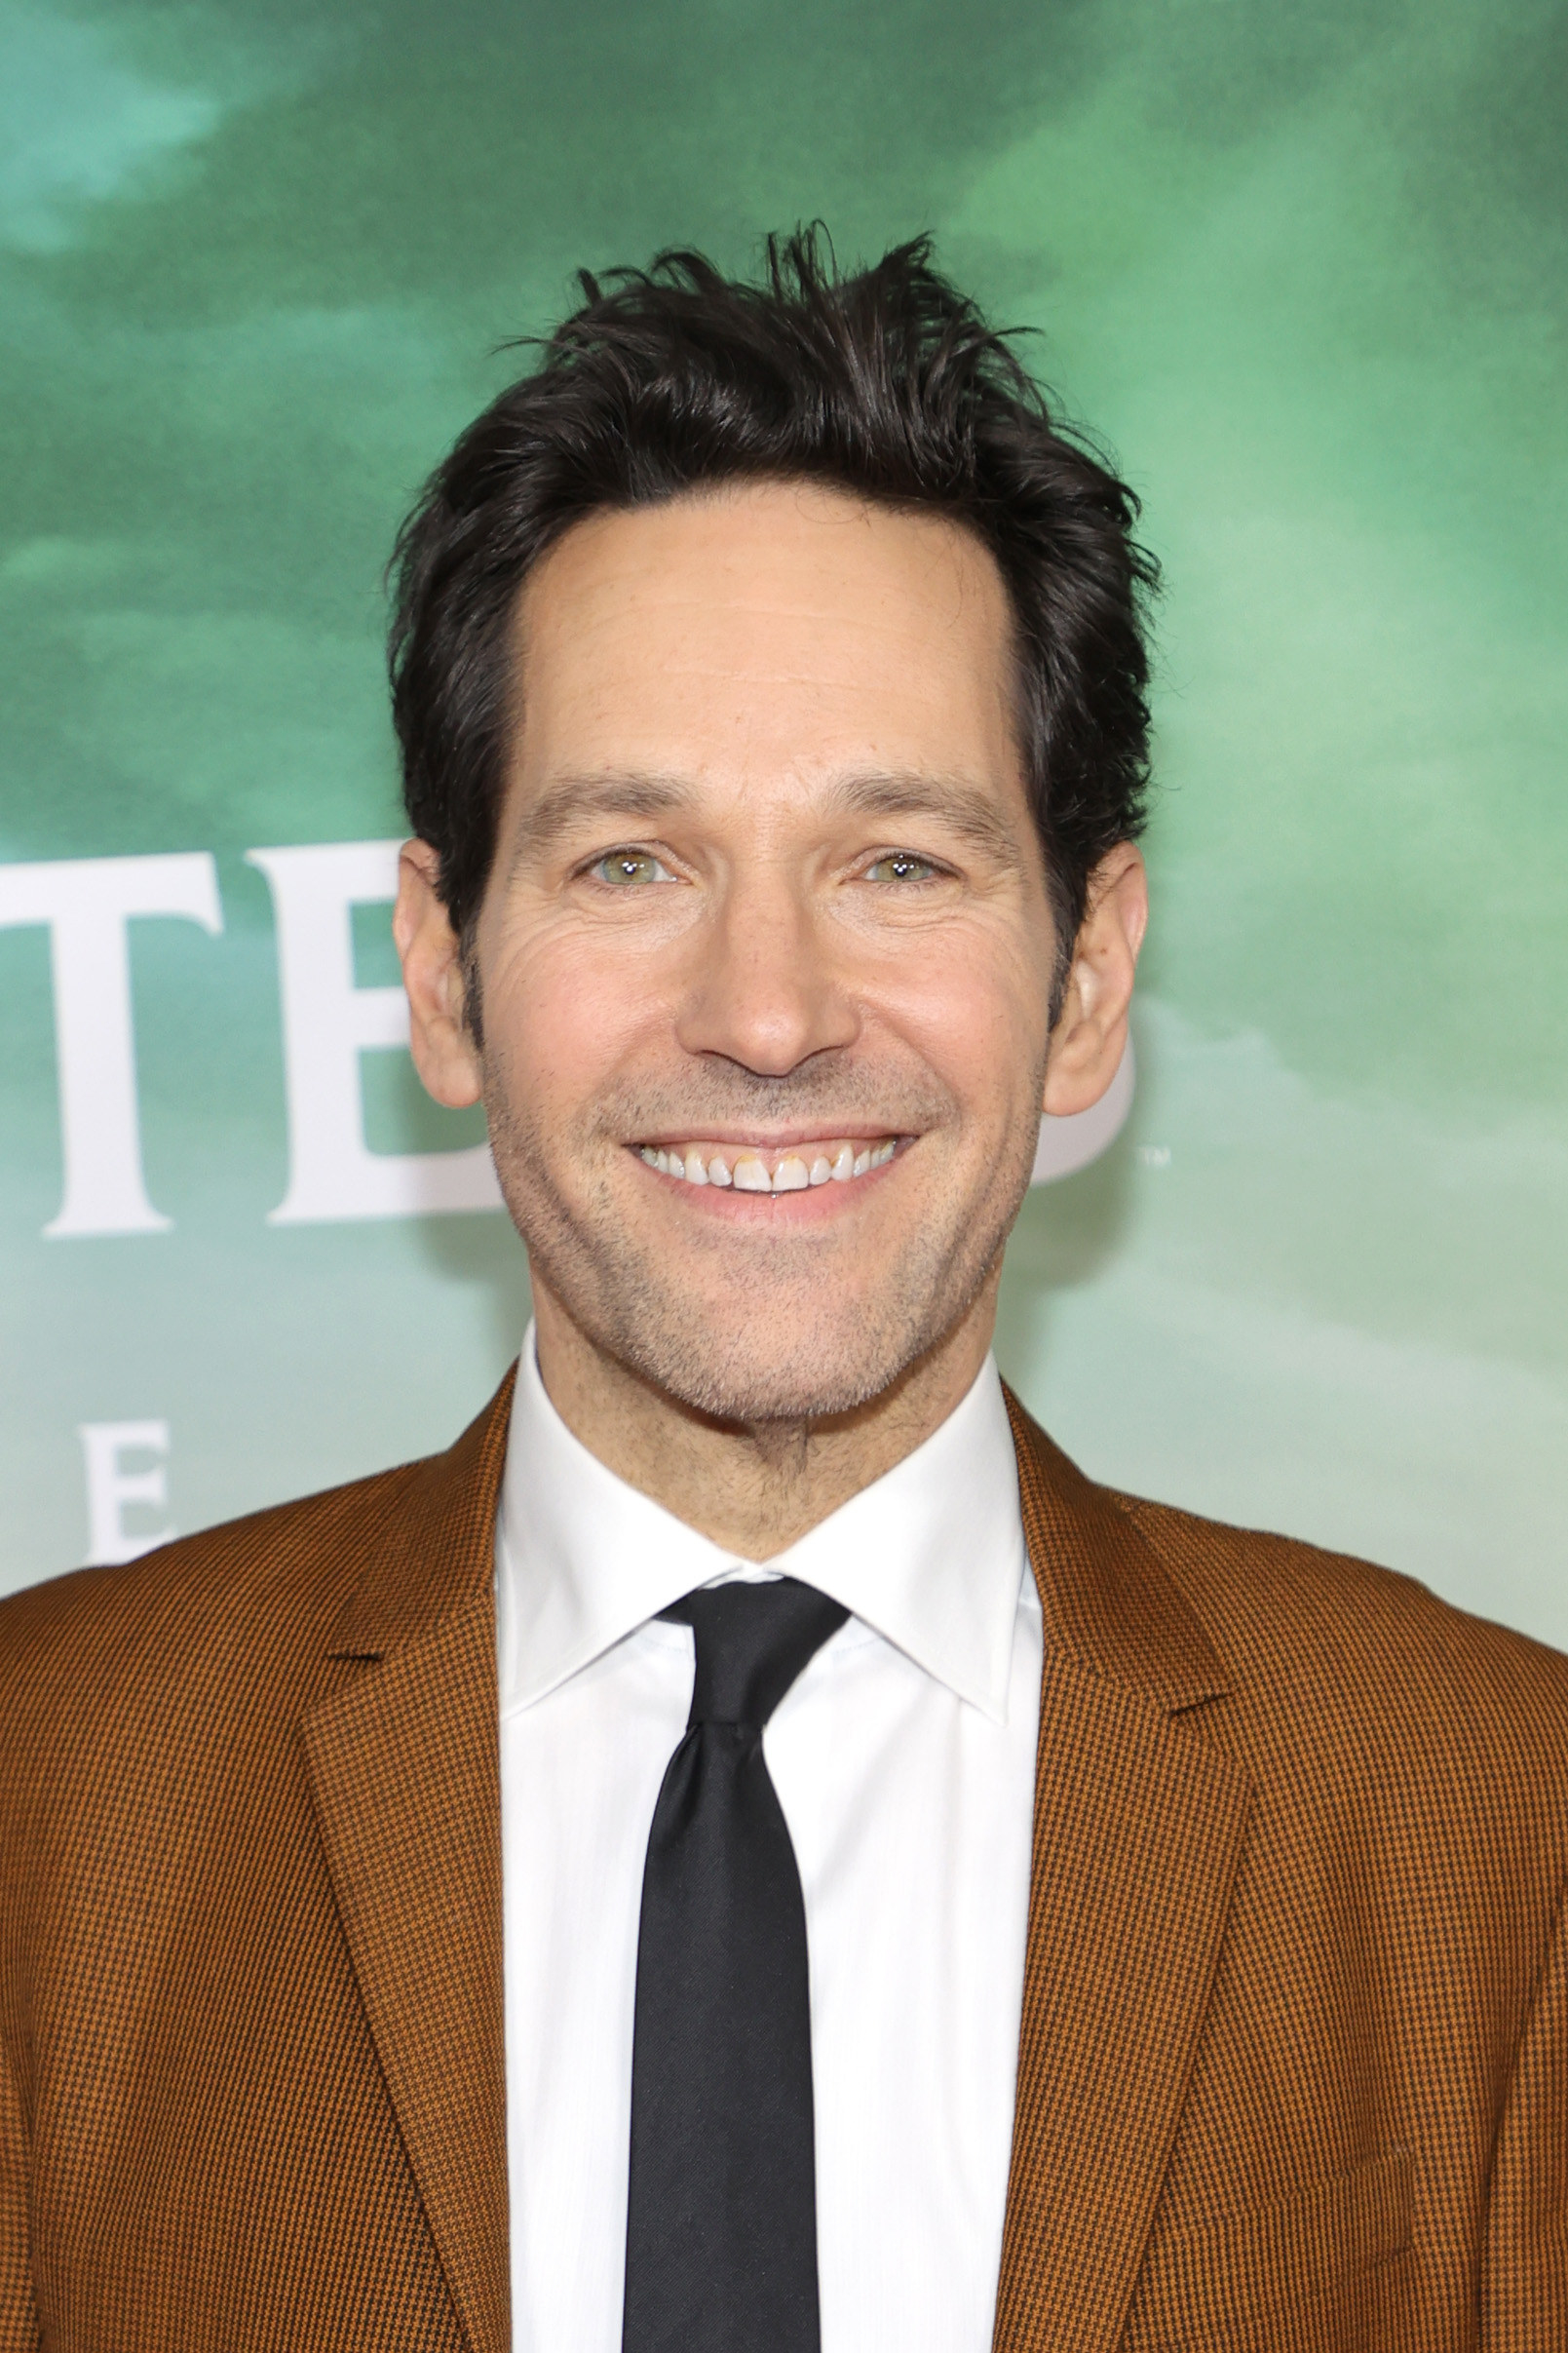 Paul Rudd smiles on the red carpet at the ghostbusters premiere in a suit